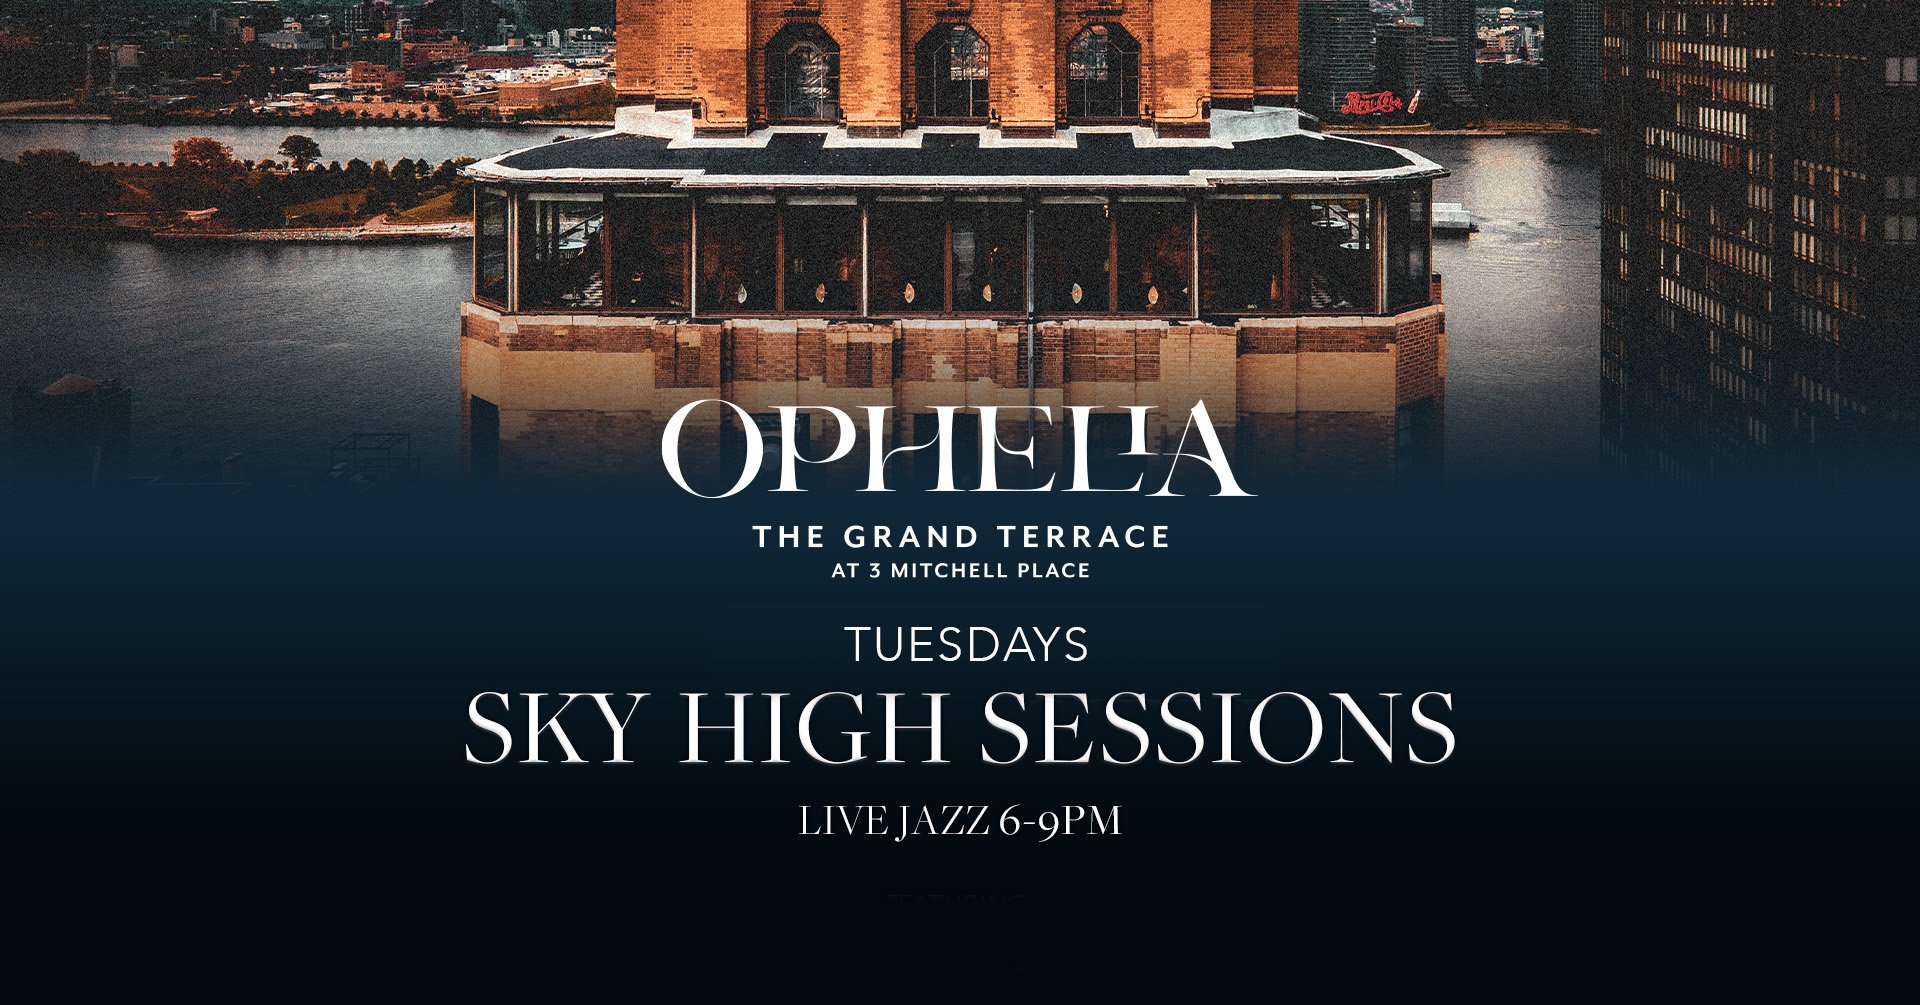 SKY HIGH SESSIONS at Ophelia: every Tuesday